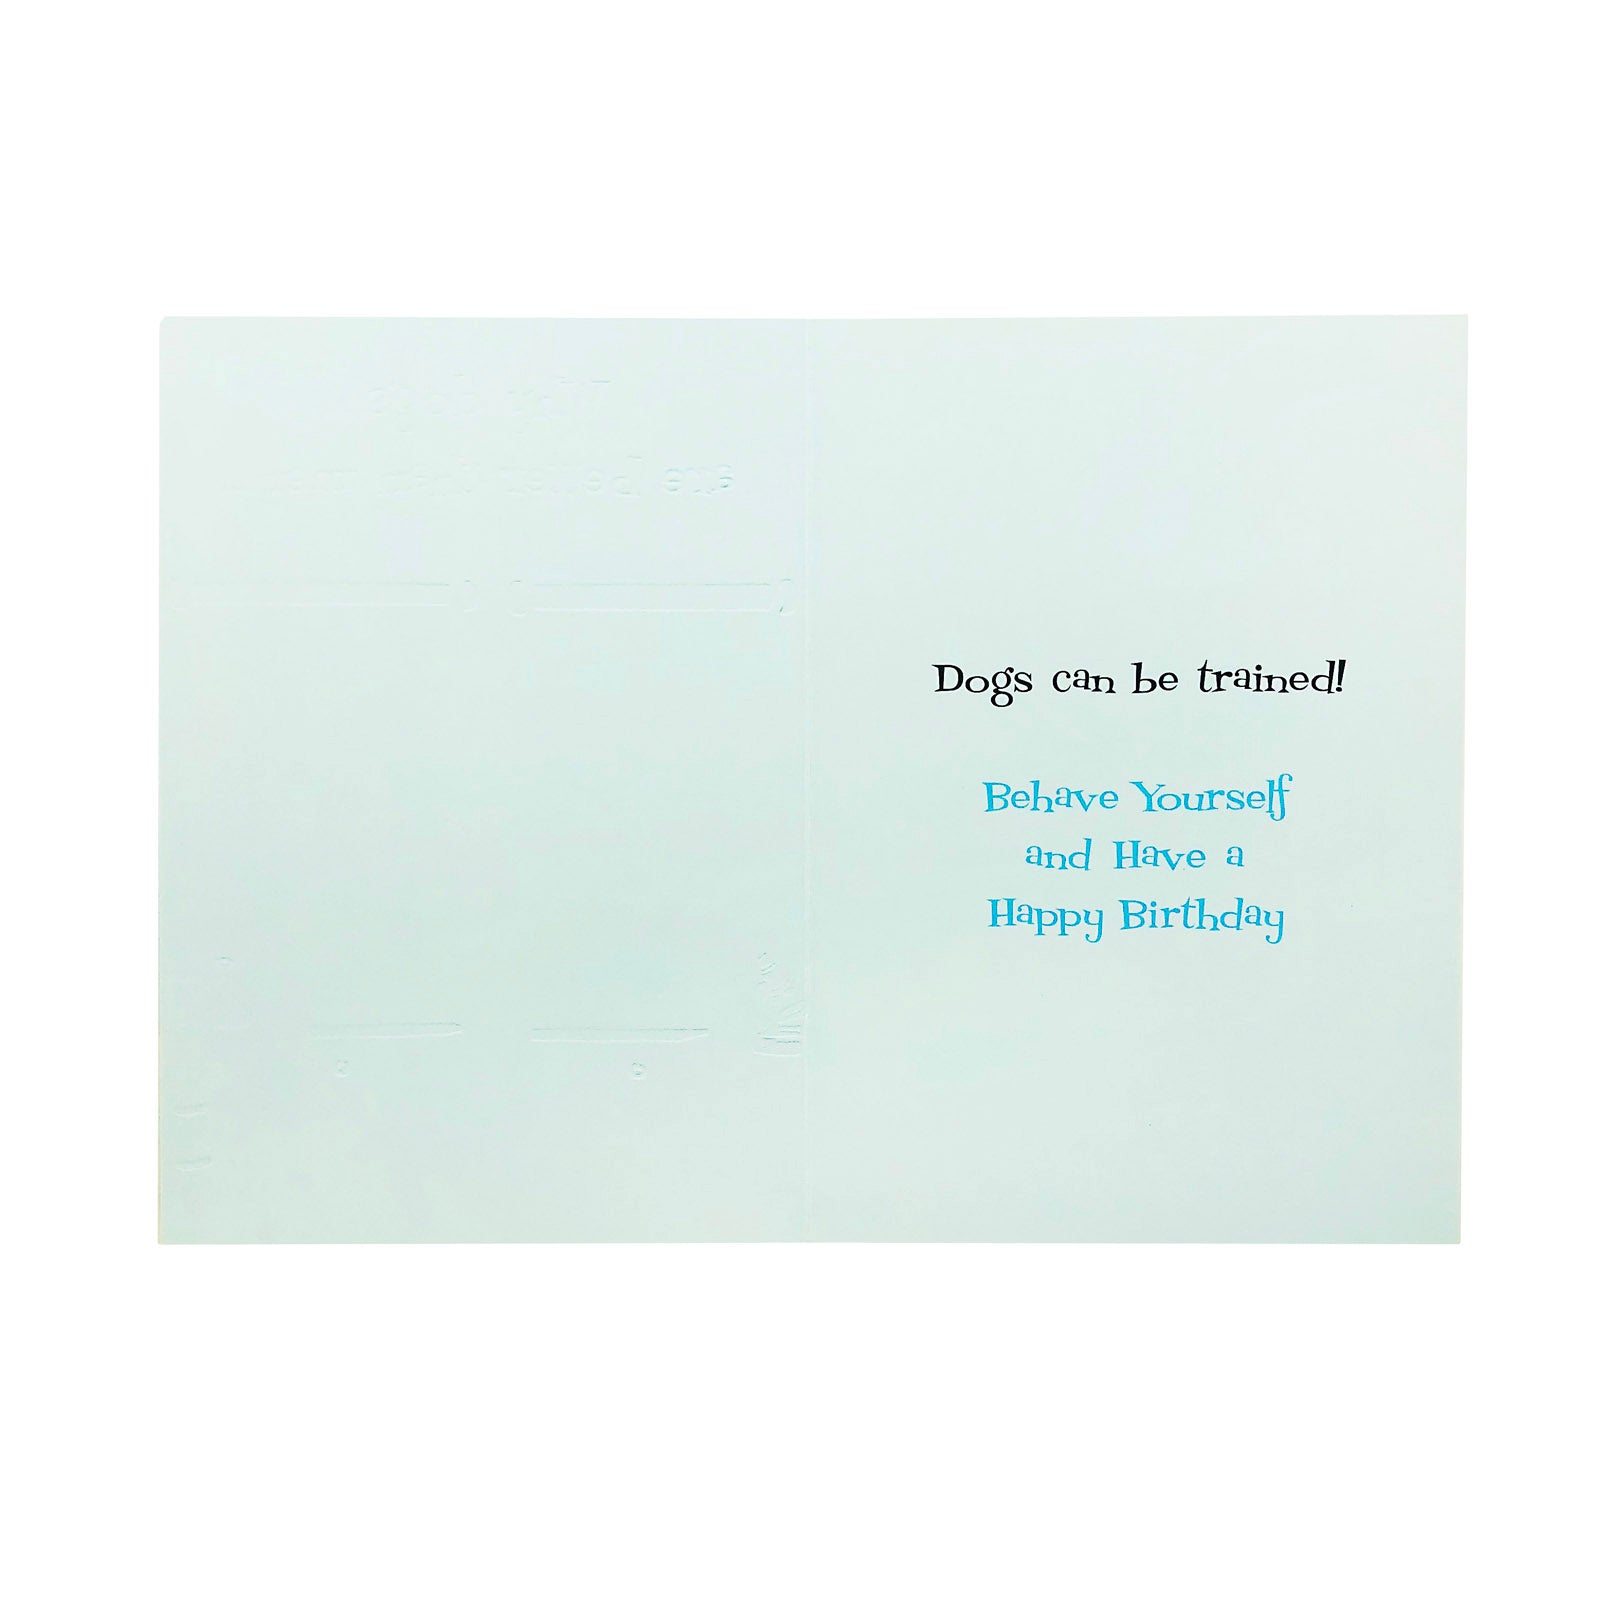 Designer Greetings Birthday Card - Why Dogs Are Better Than Men